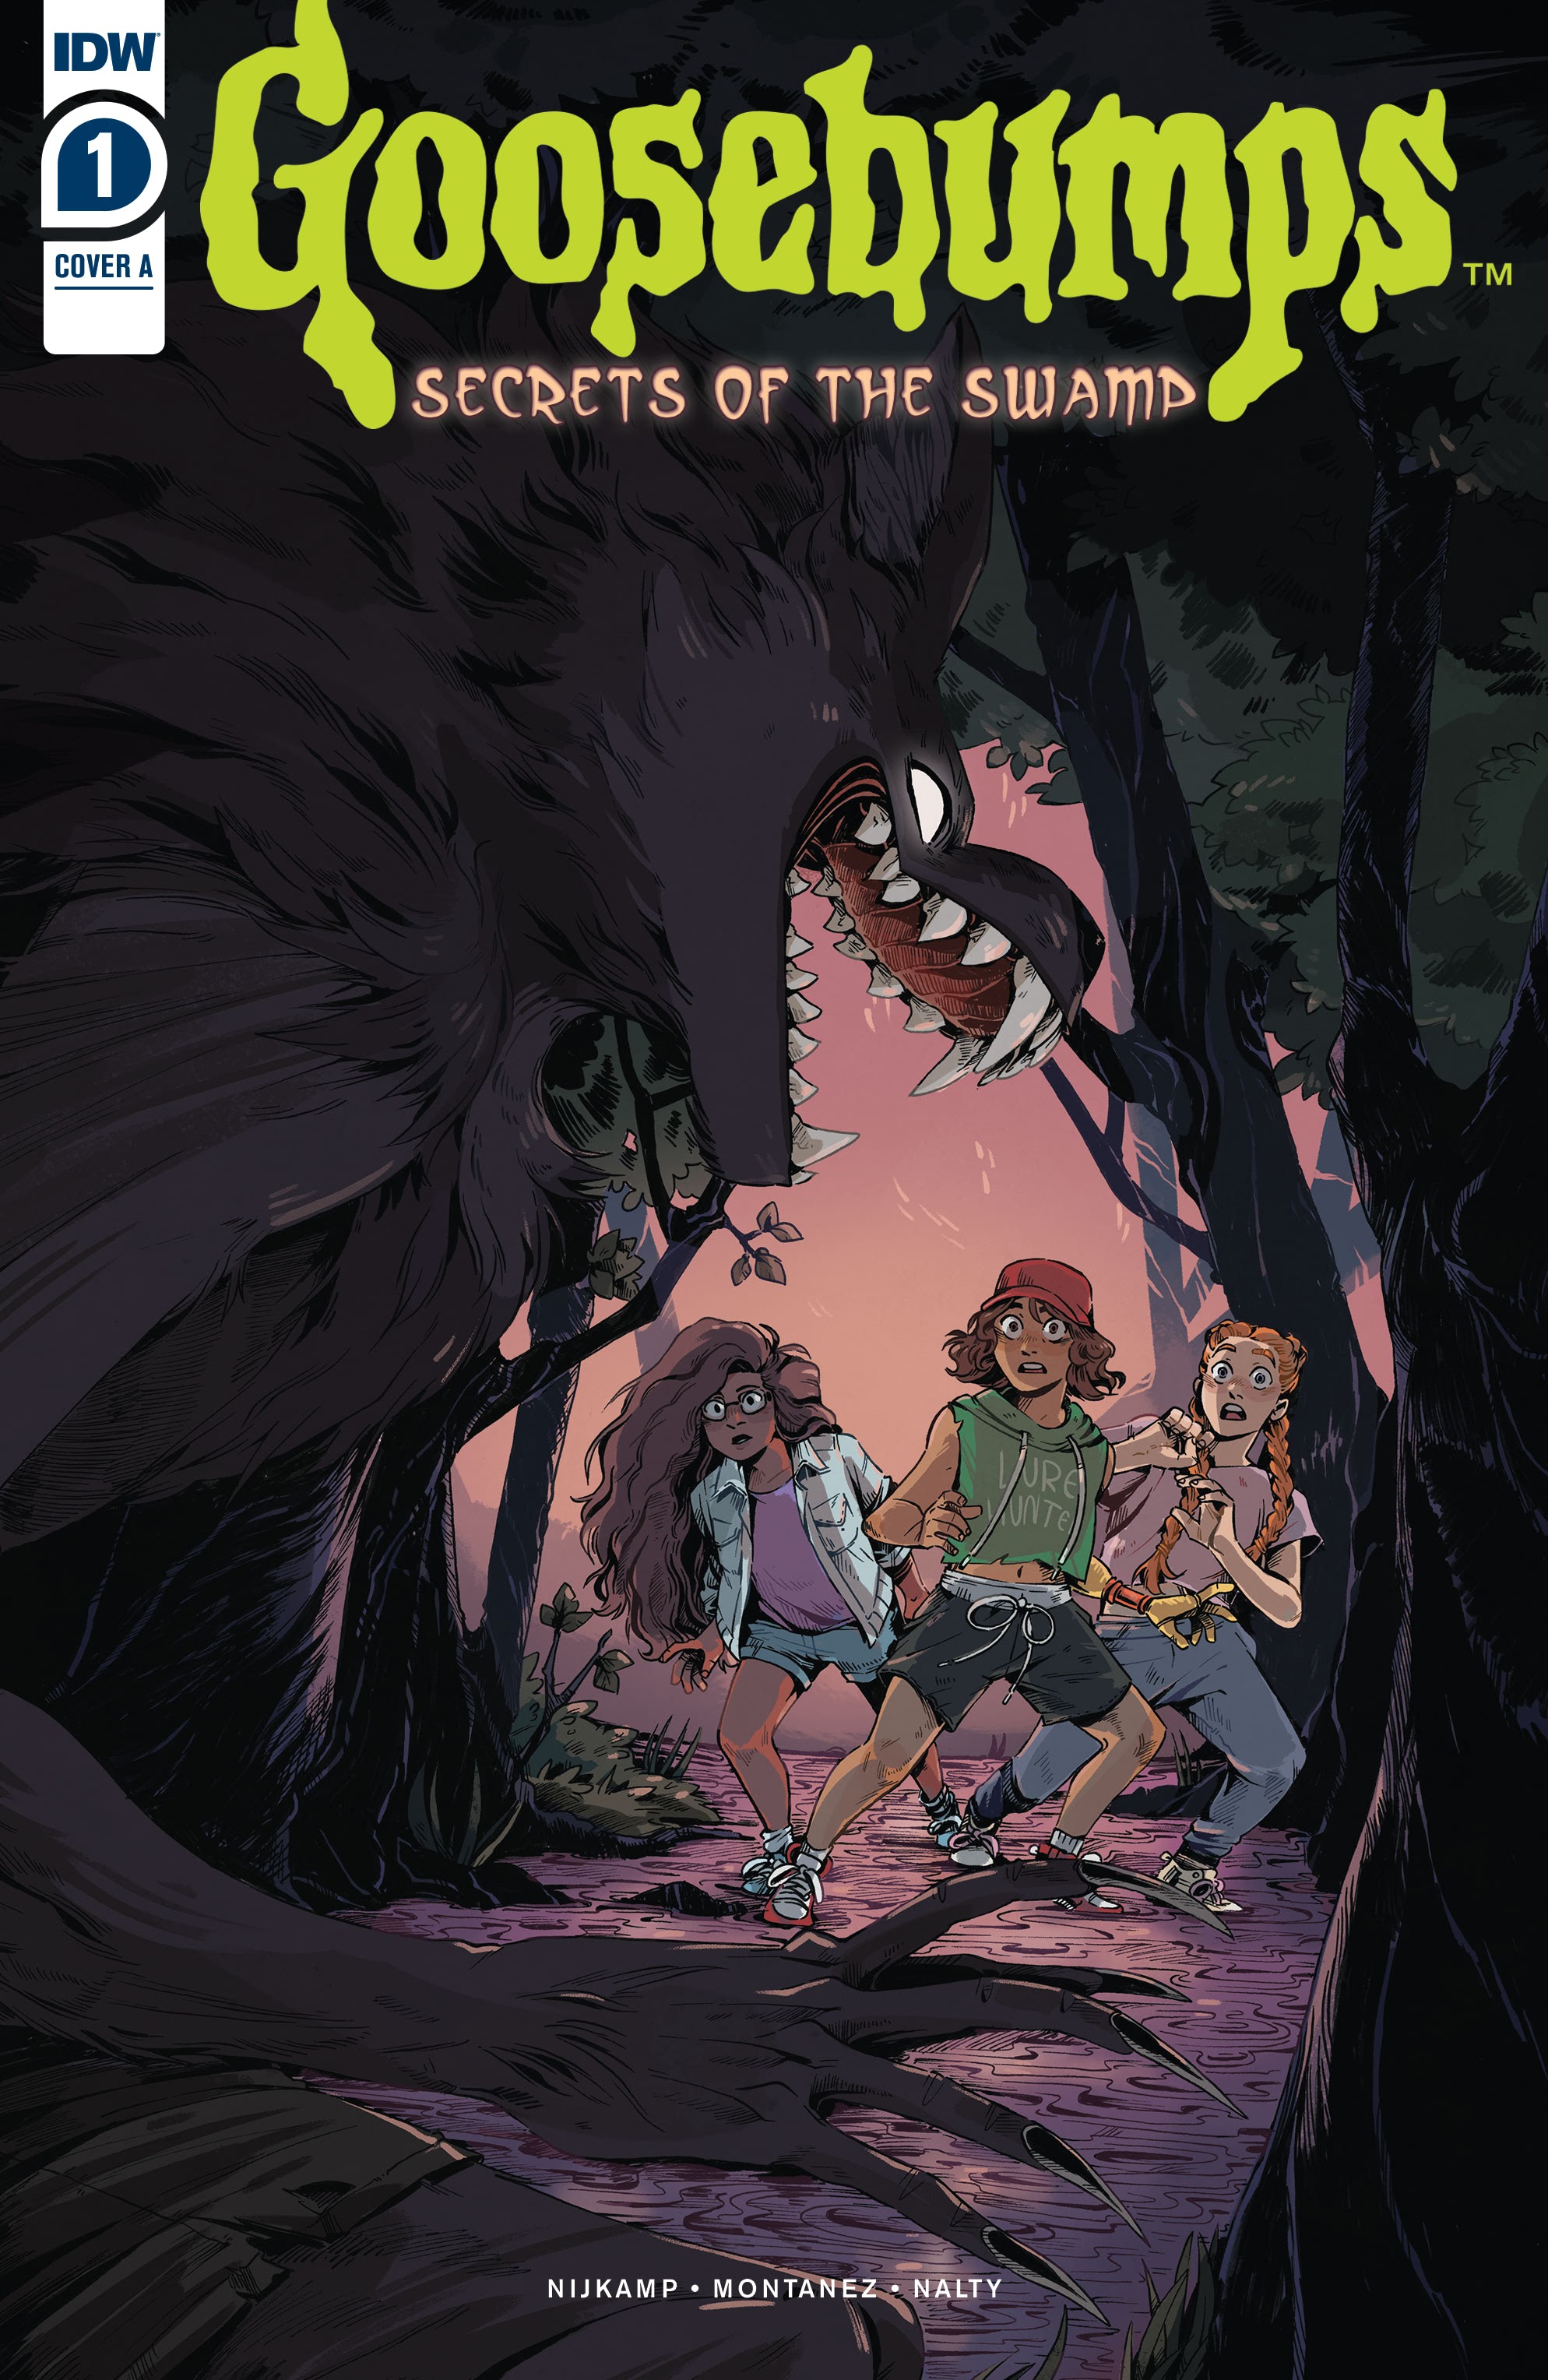 Goosebumps Secrets Of The Swamp Issue 1 | Read Goosebumps Secrets Of The  Swamp Issue 1 comic online in high quality. Read Full Comic online for free  - Read comics online in